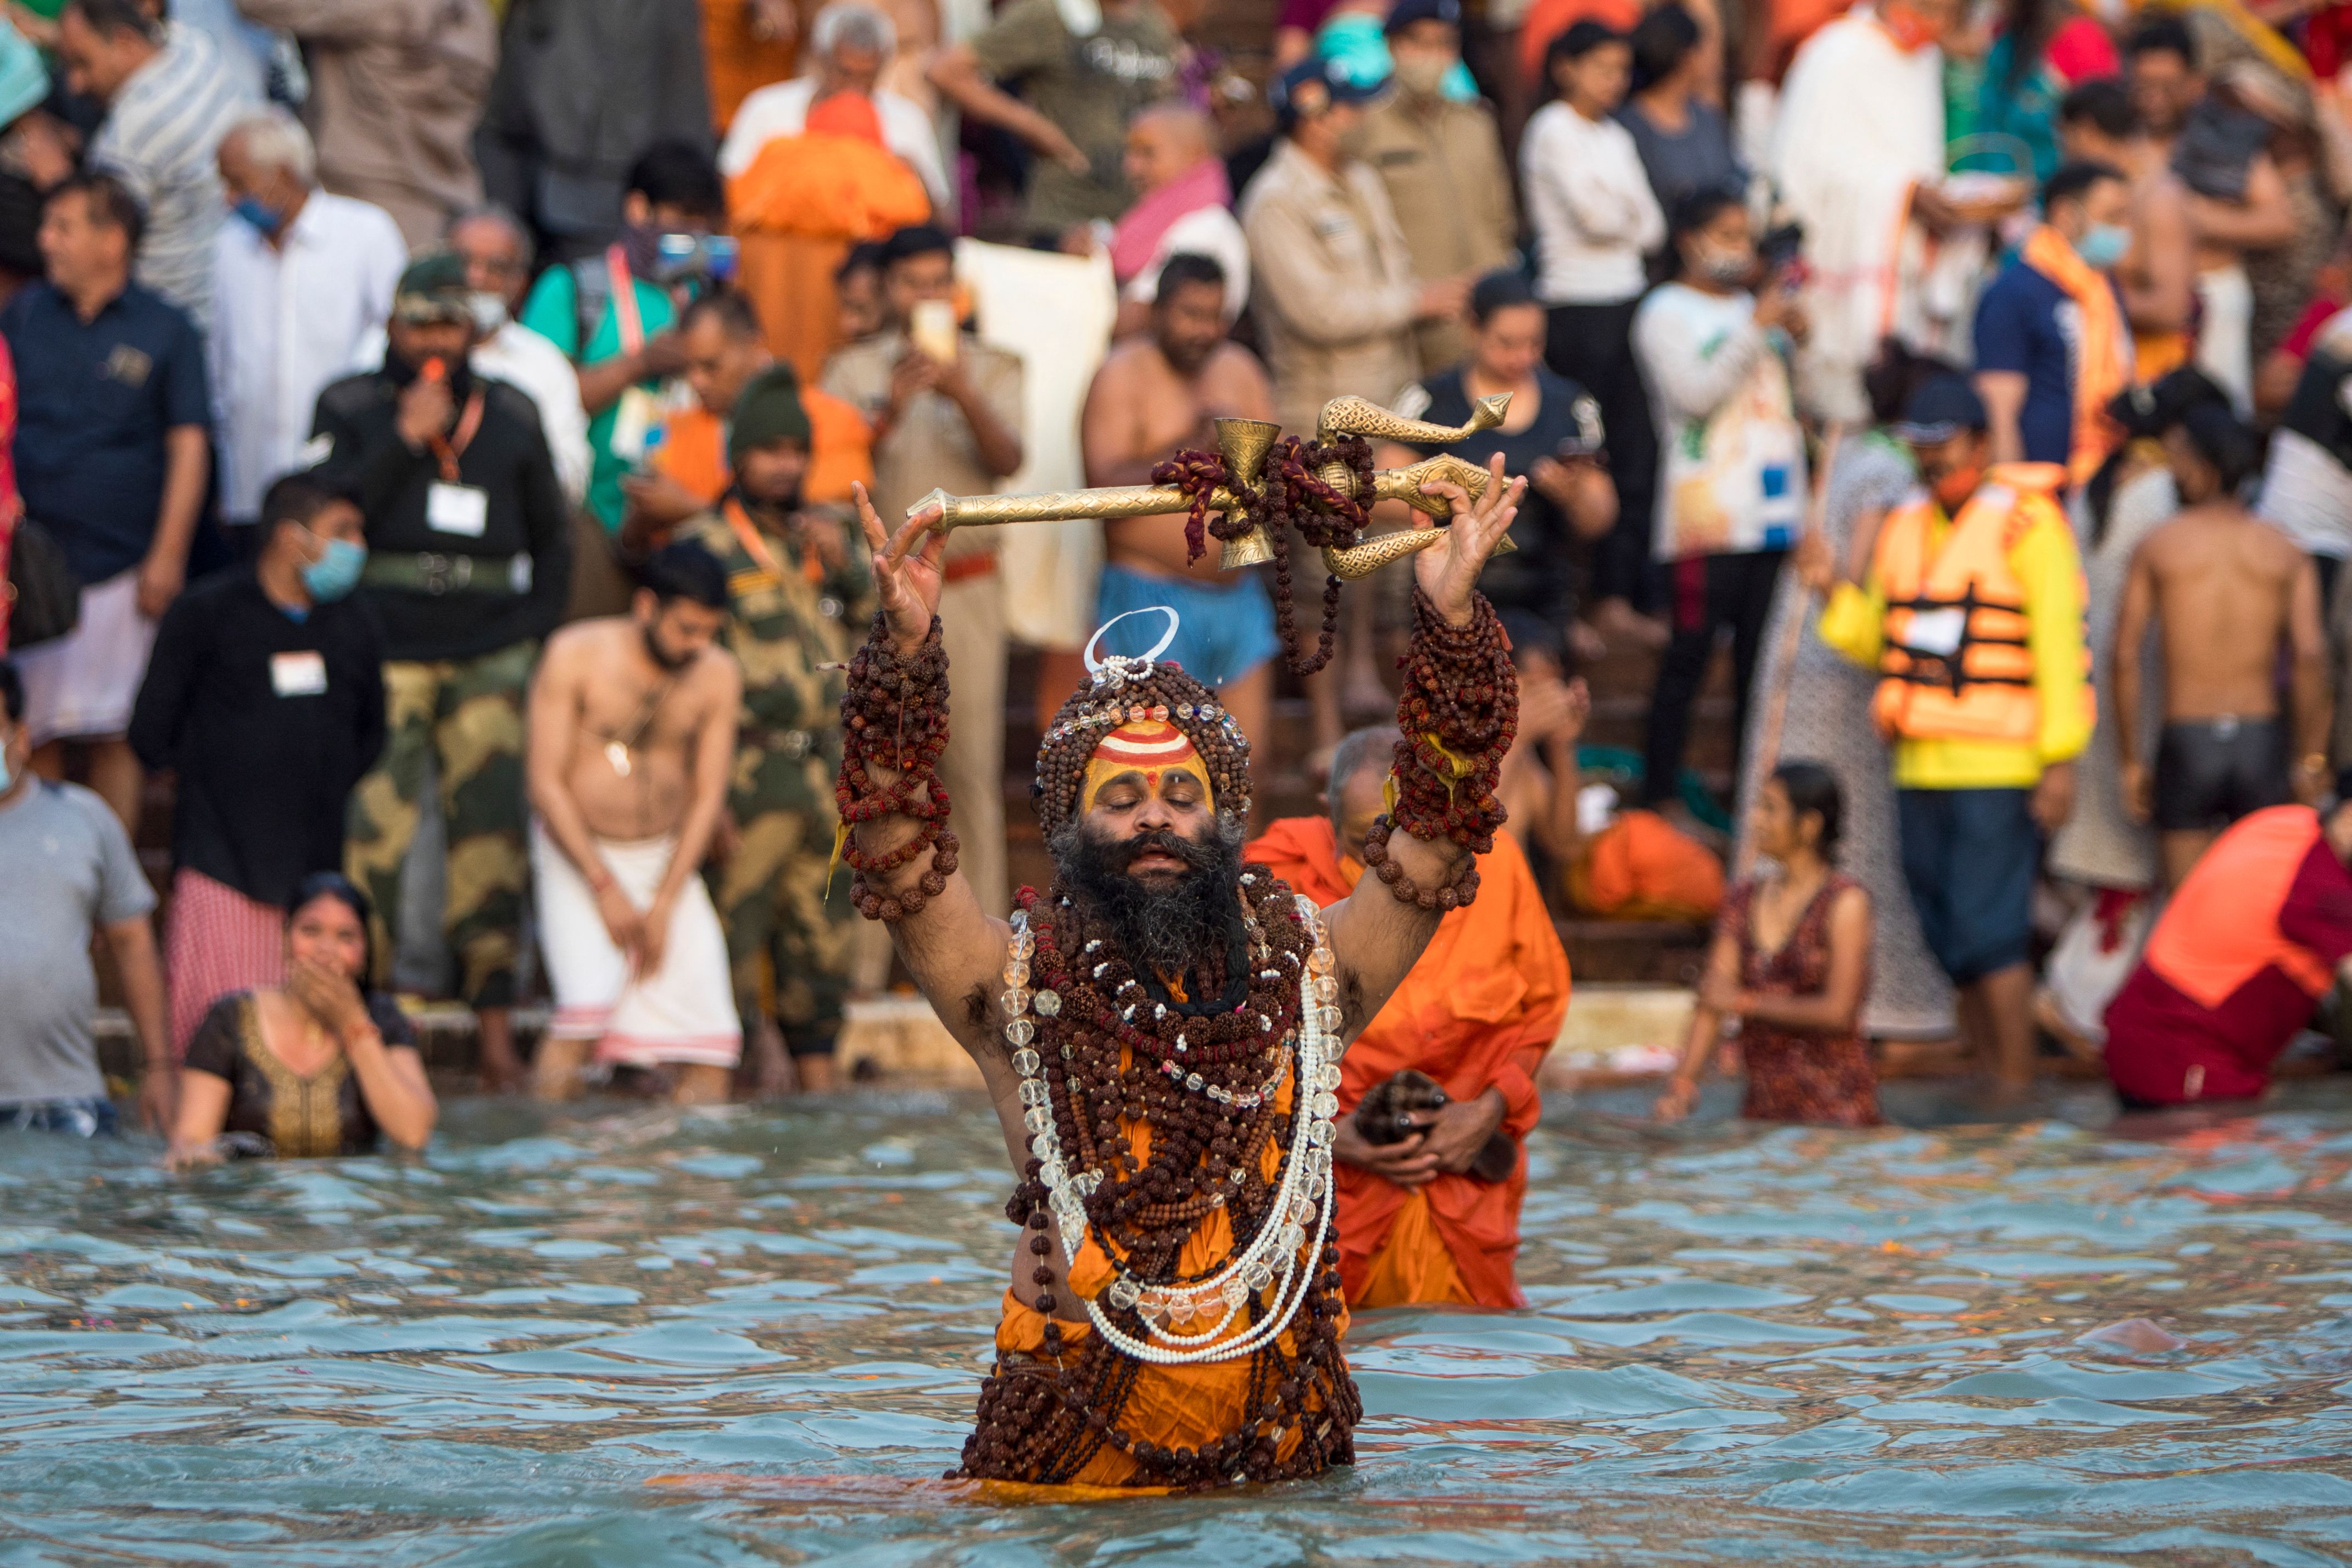 The religious conclave was held in Haridwar, an important Hindu pilgrimage site in the state of Uttarakhand, in northern India.